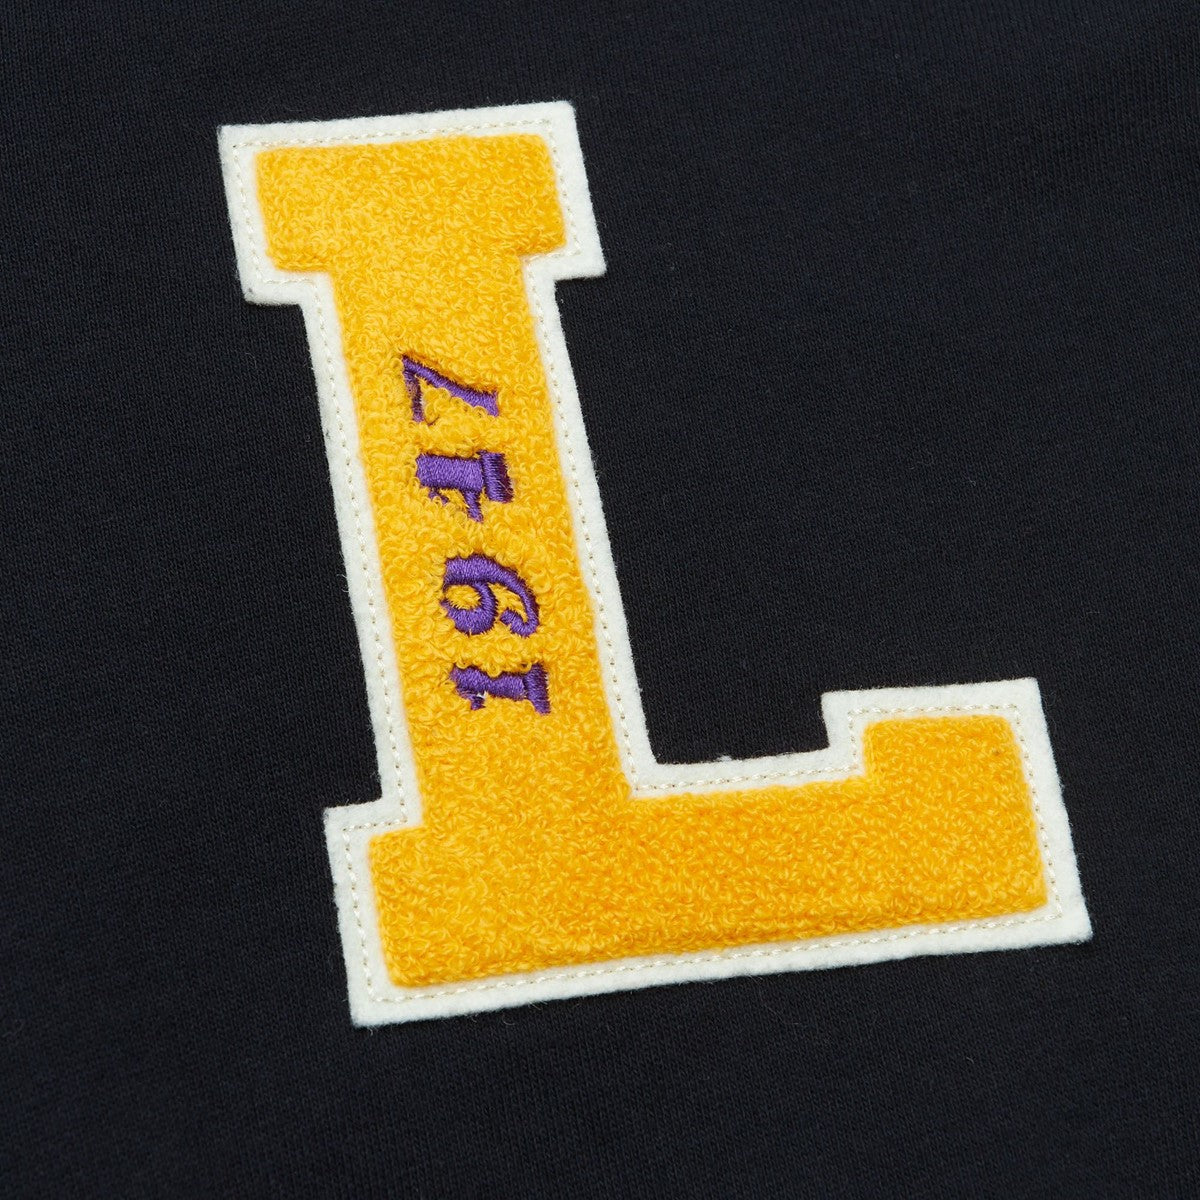 MITCHELL & NESS Los Aangeles Lakers - NBA TEAM LEGACY FRENCH TERRY HOODY【FPHD5513】